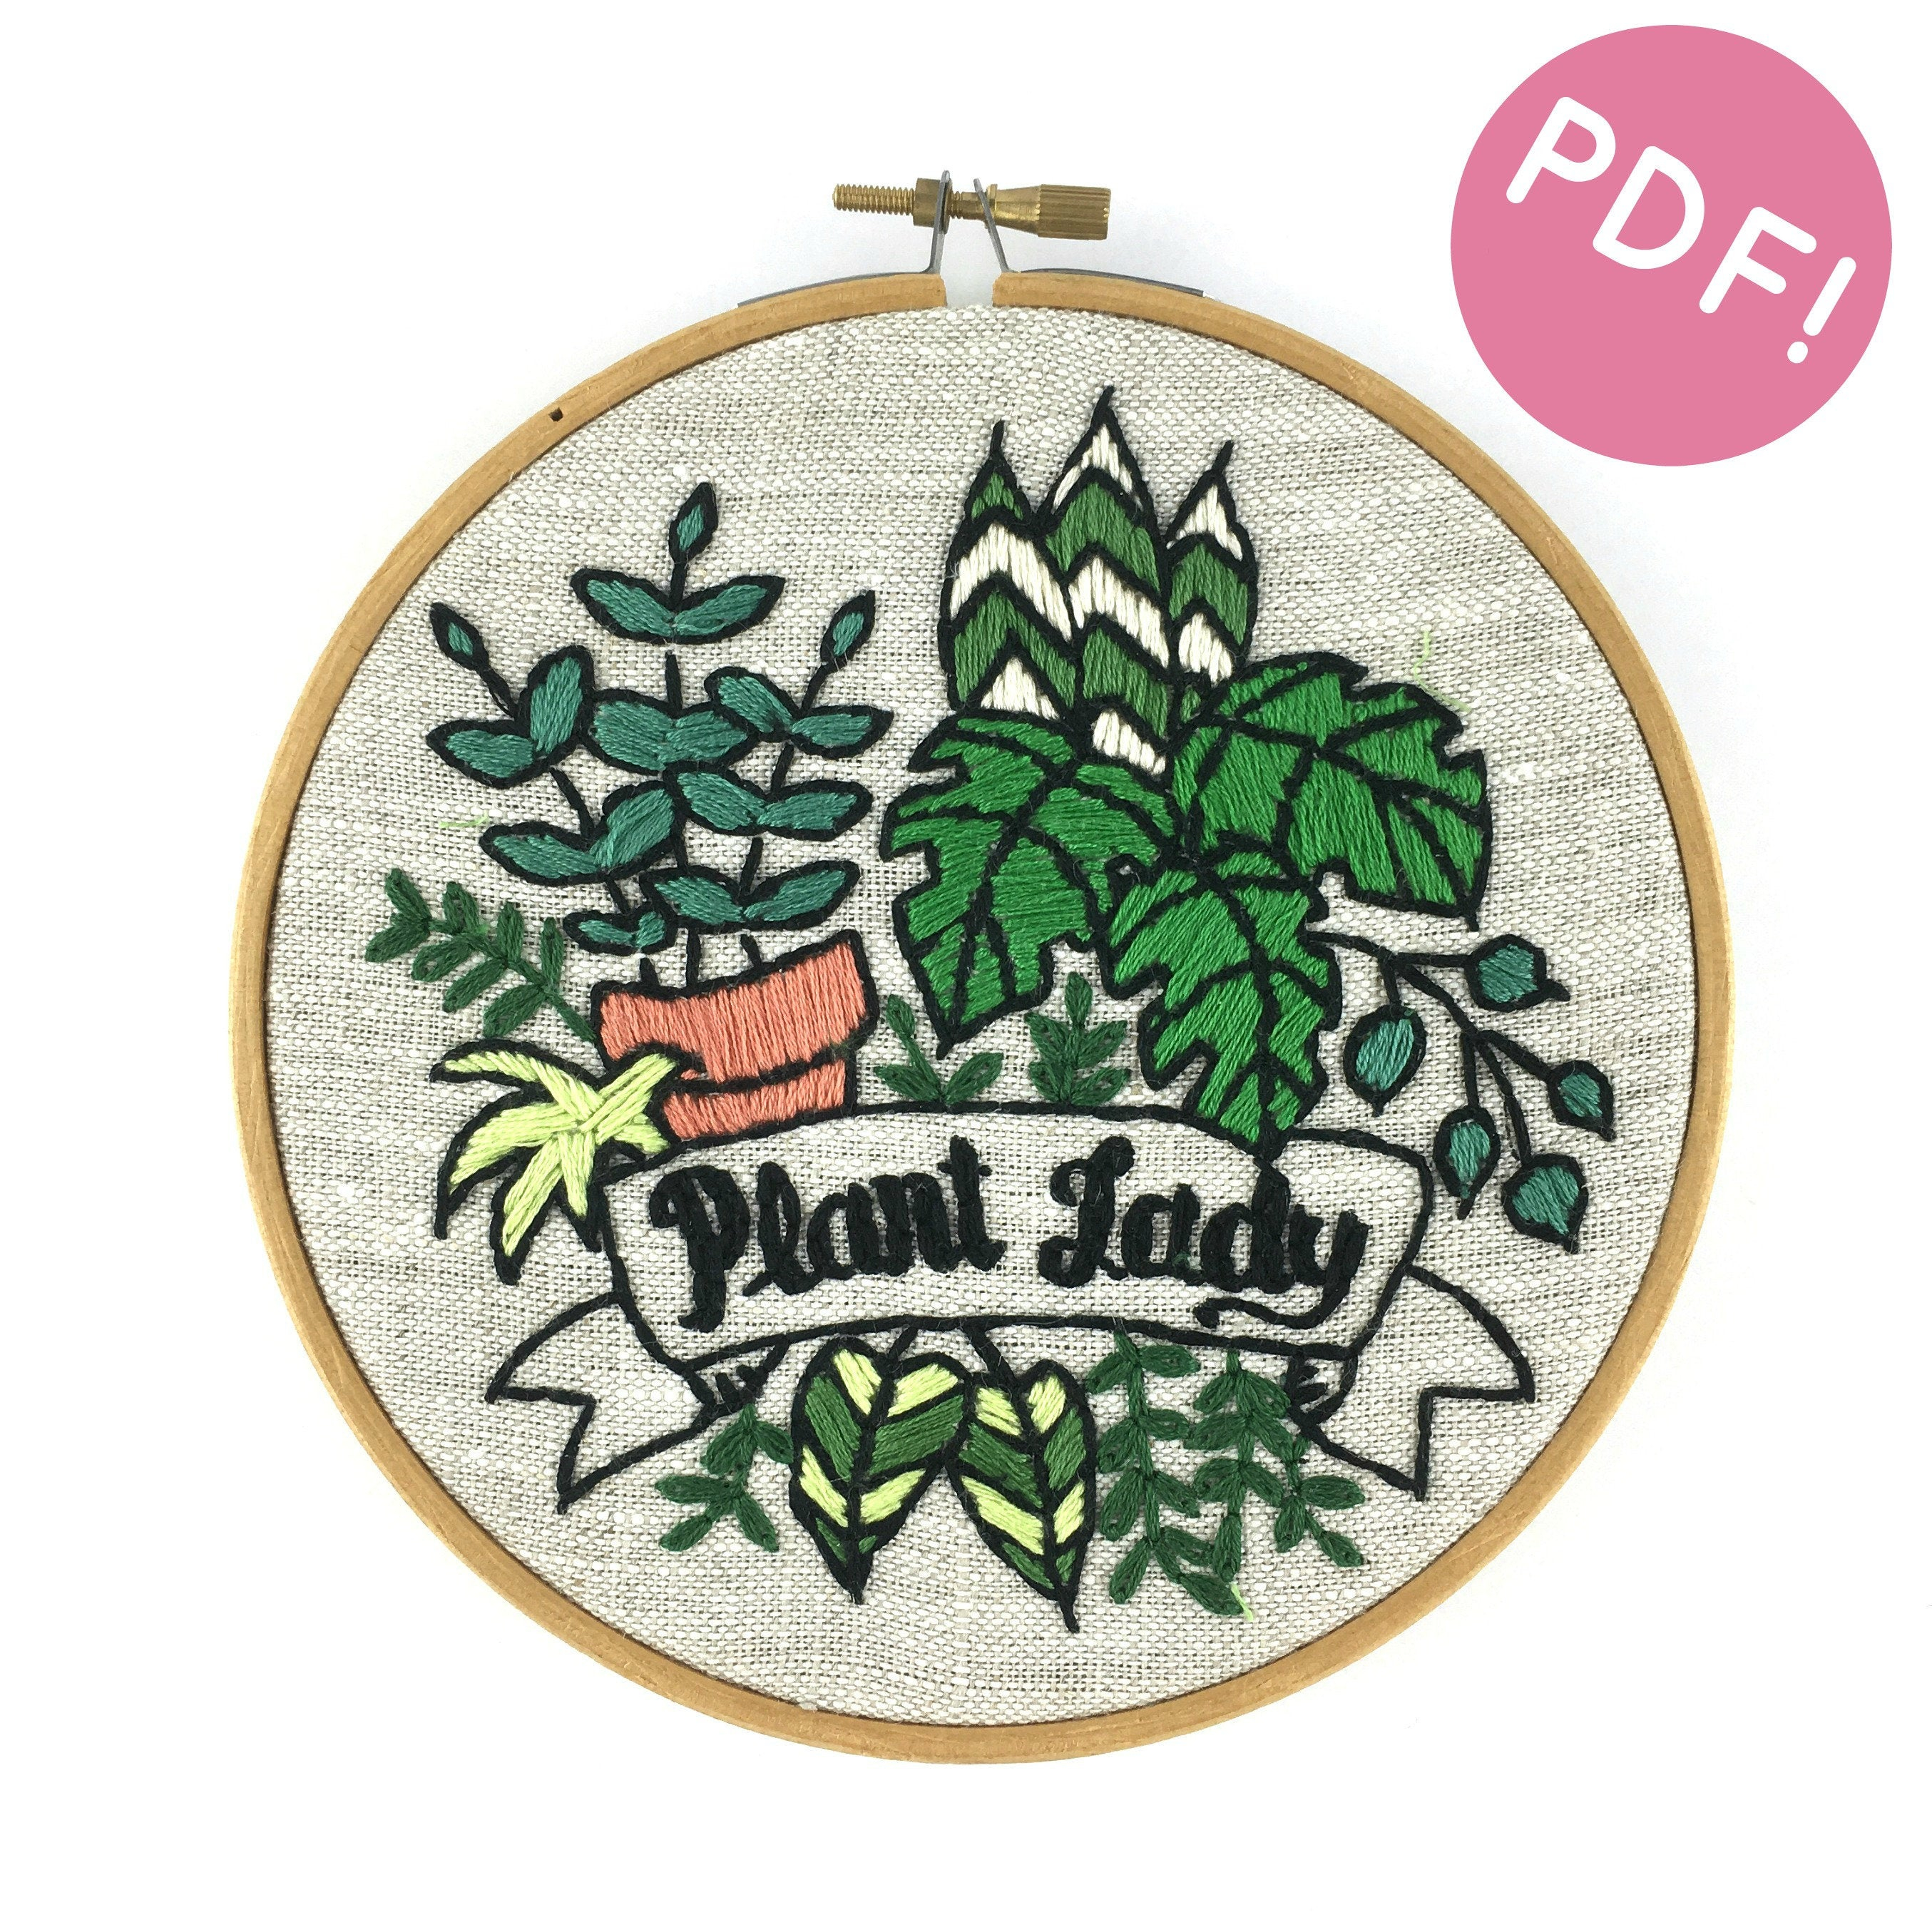 Modern Embroidery Patterns Plant Lady Embroidery Pattern